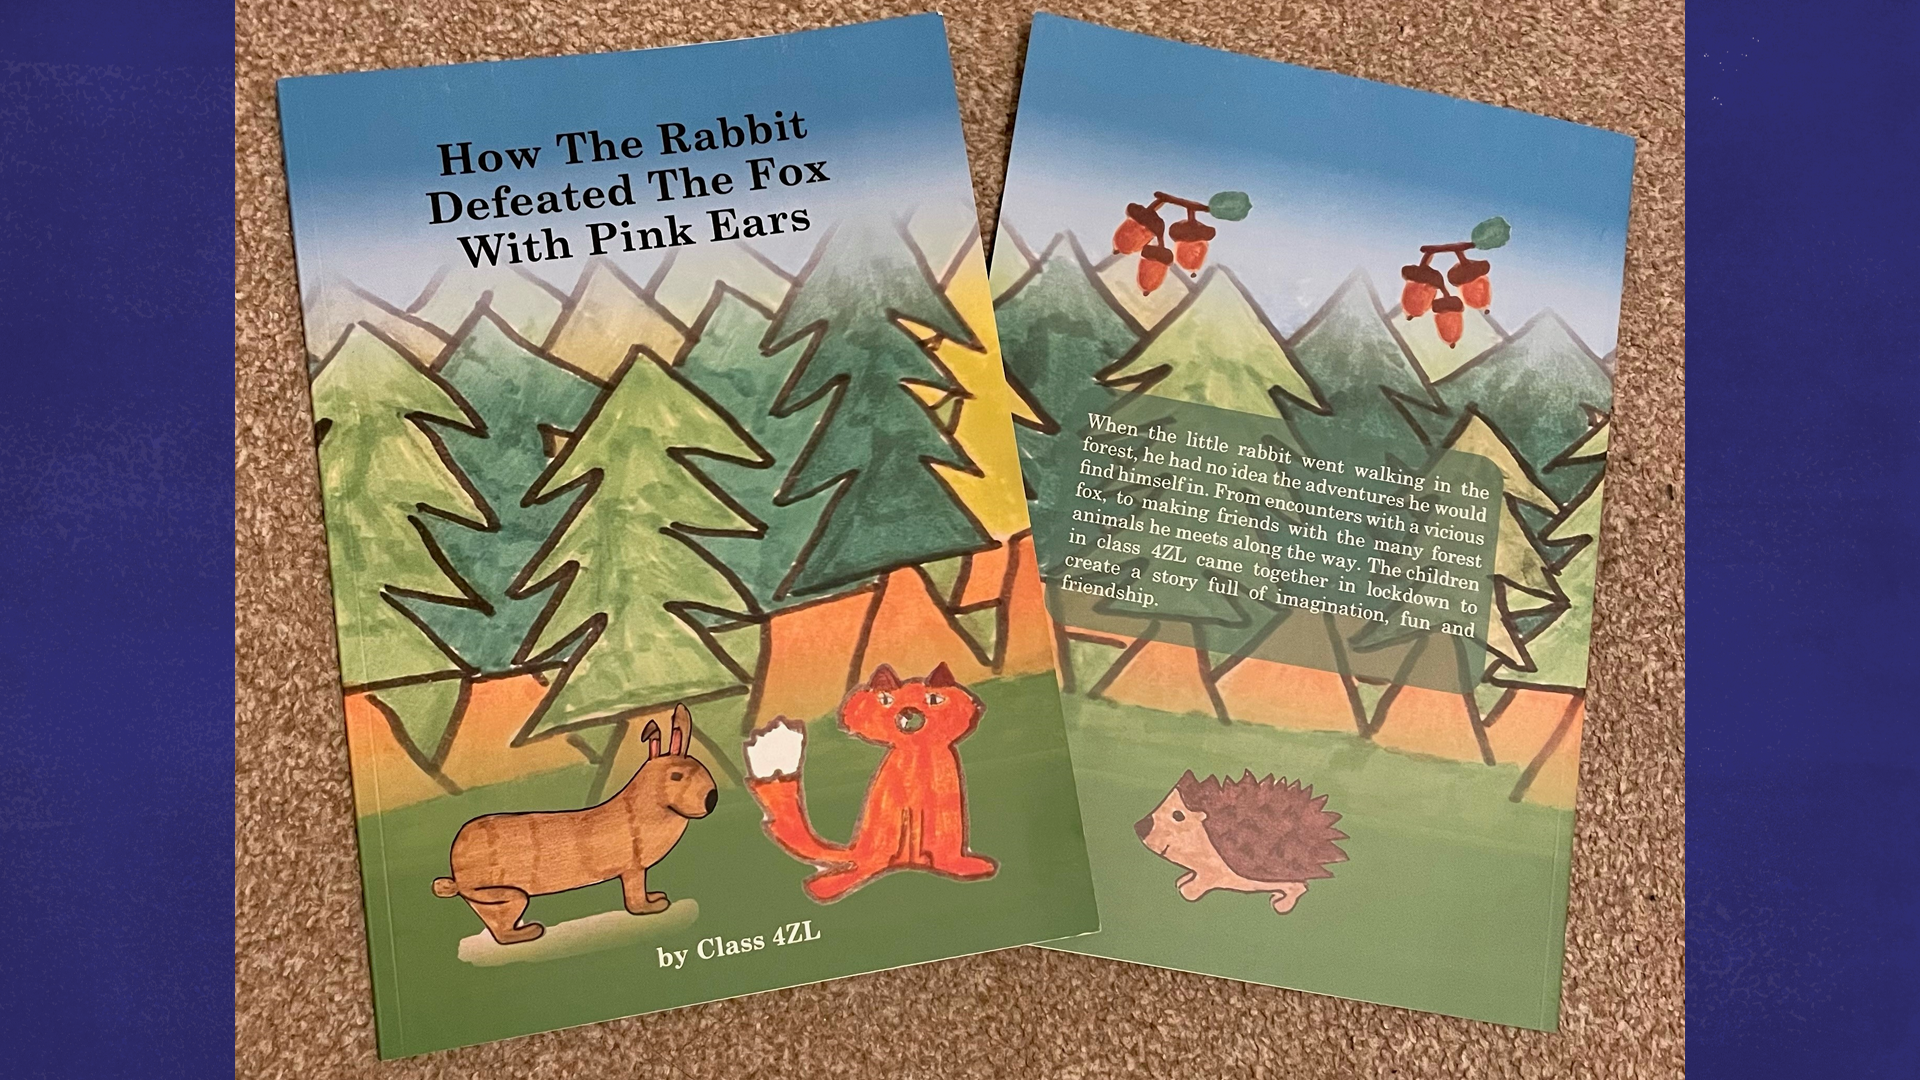 Class 6CJ's book, 'How the rabbit defeated the fox with pink ears', showing the front cover and blurb.